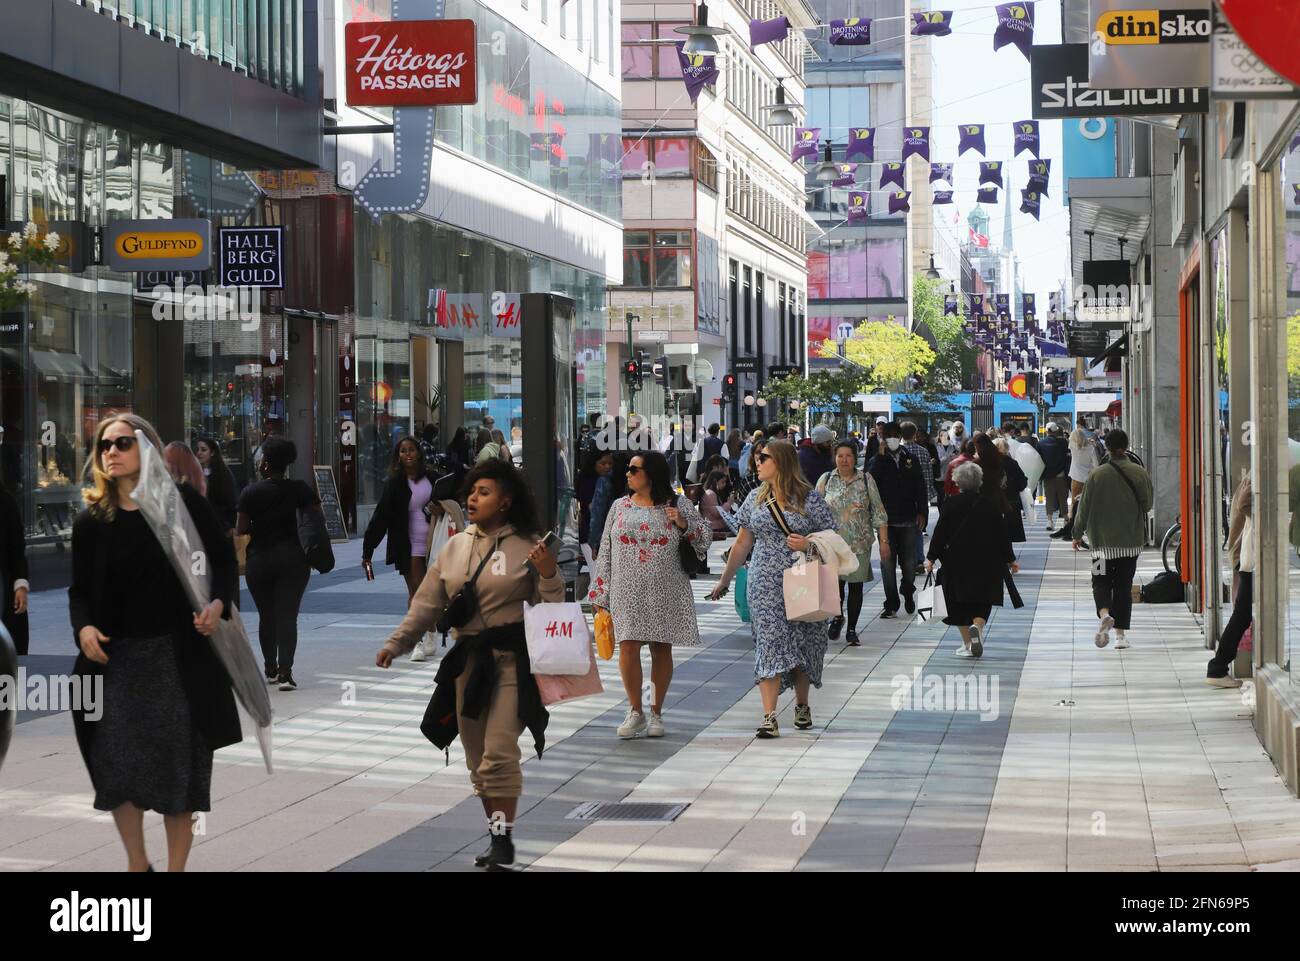 Stockholm, Sweden - May 12, 2021: People walking the crowded pedestrian only Drottninggatan street a shopping area in the downtown district. Stock Photo